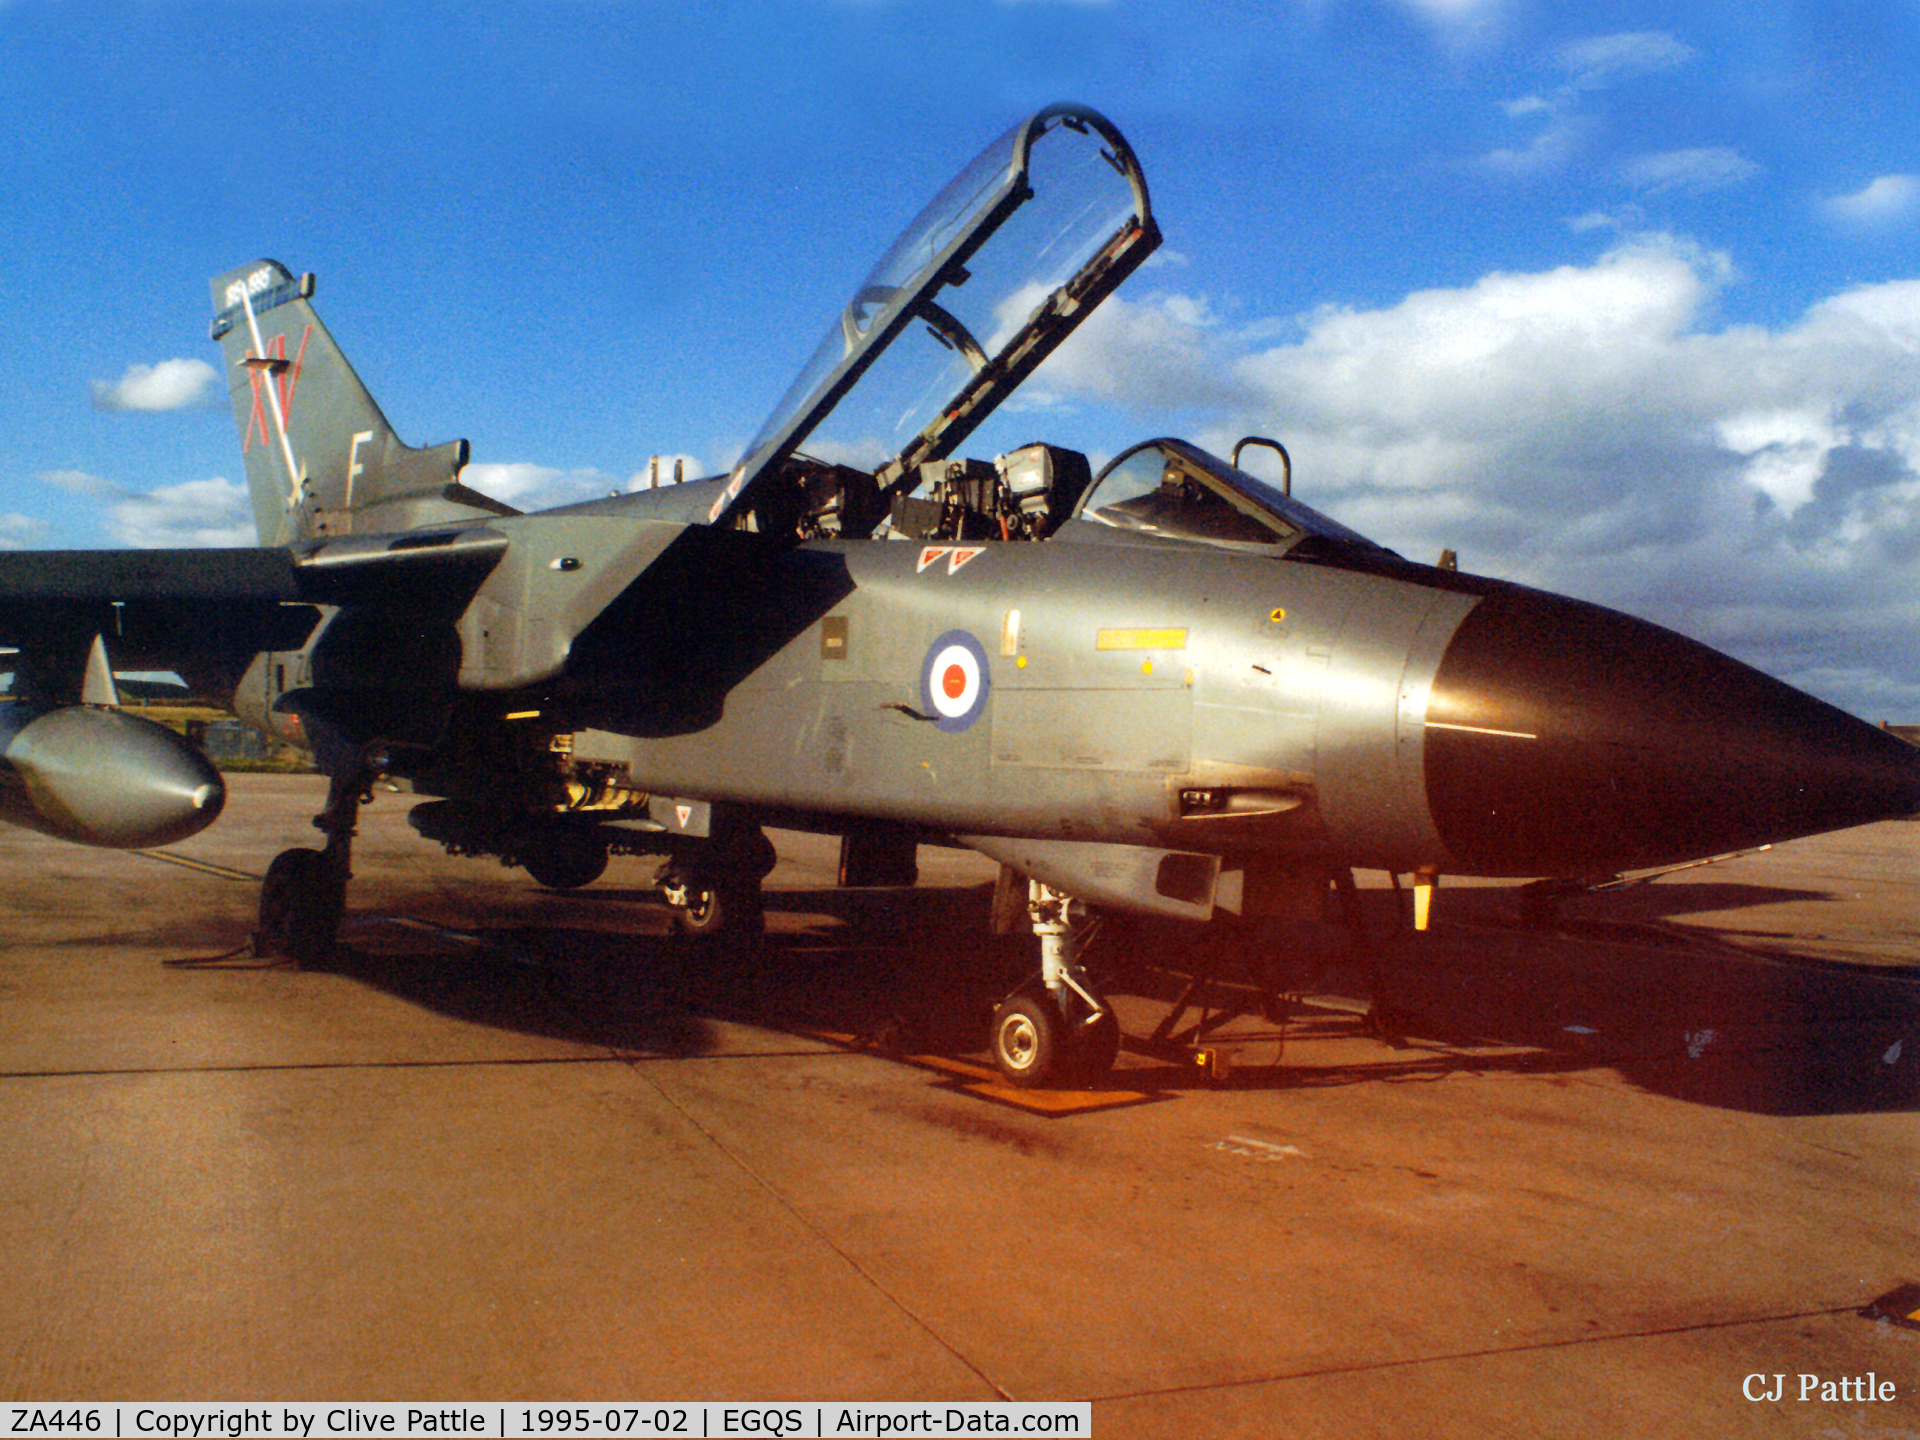 ZA446, 1983 Panavia Tornado GR.1 C/N 234/BS076/3112, Scanned from print, ZA446 in Special Anniversary Markings and marked as Coded F with 15 R Sqn RAF.  This aircraft was then the current 'MacRobert's Reply' (please google for full explanation).